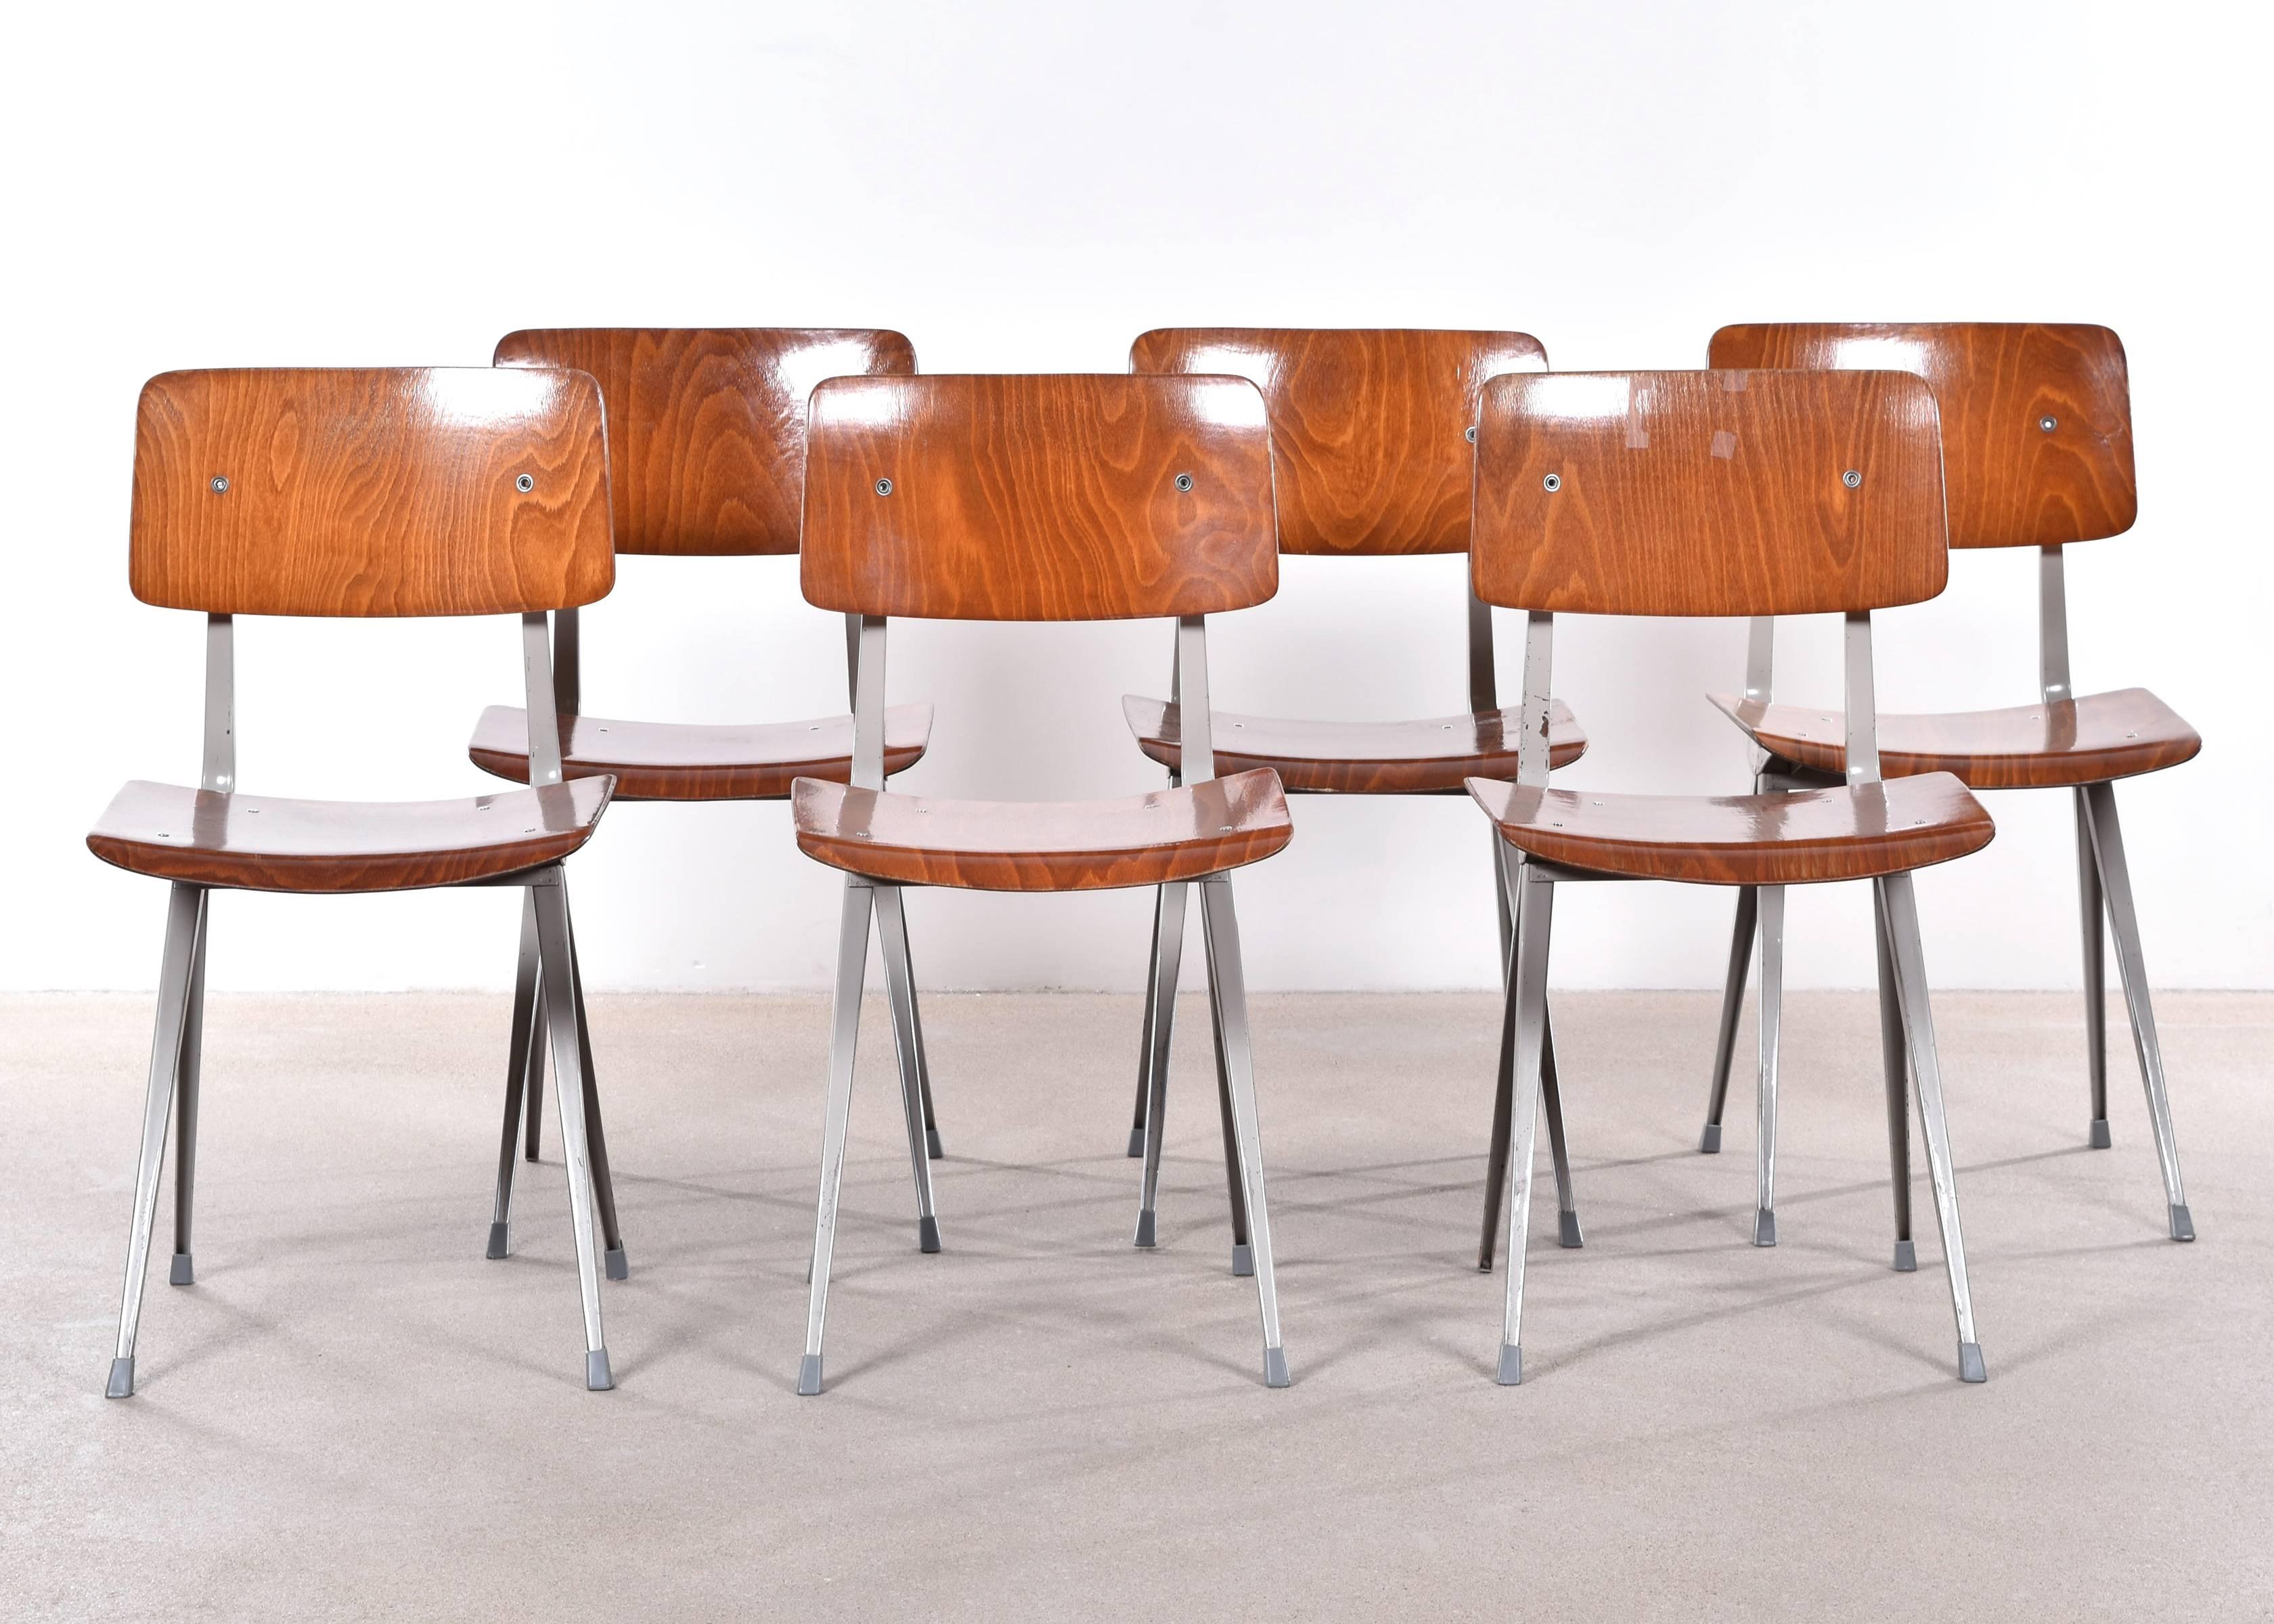 Functional, Industrial and comfortable Friso Kramer result (second edition) plywood chairs. Plywood (synthetic) seats or backs in good condition. Slight rust and scratches on frames. Signed with impressed manufacturer's mark and labels.